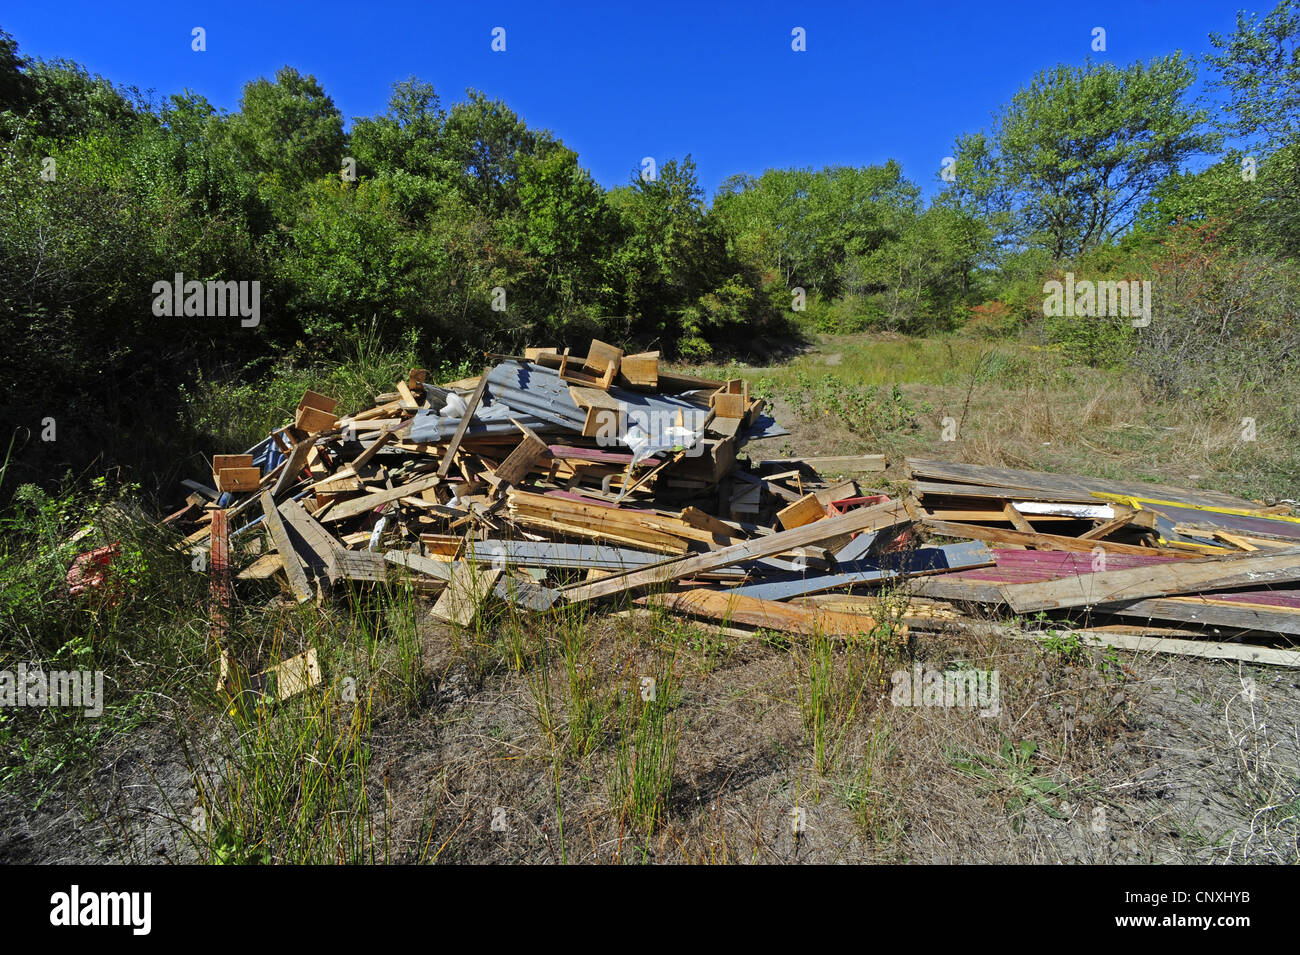 illegal construction waste disposal at a clearing, Montenegro, Insel Ada Stock Photo